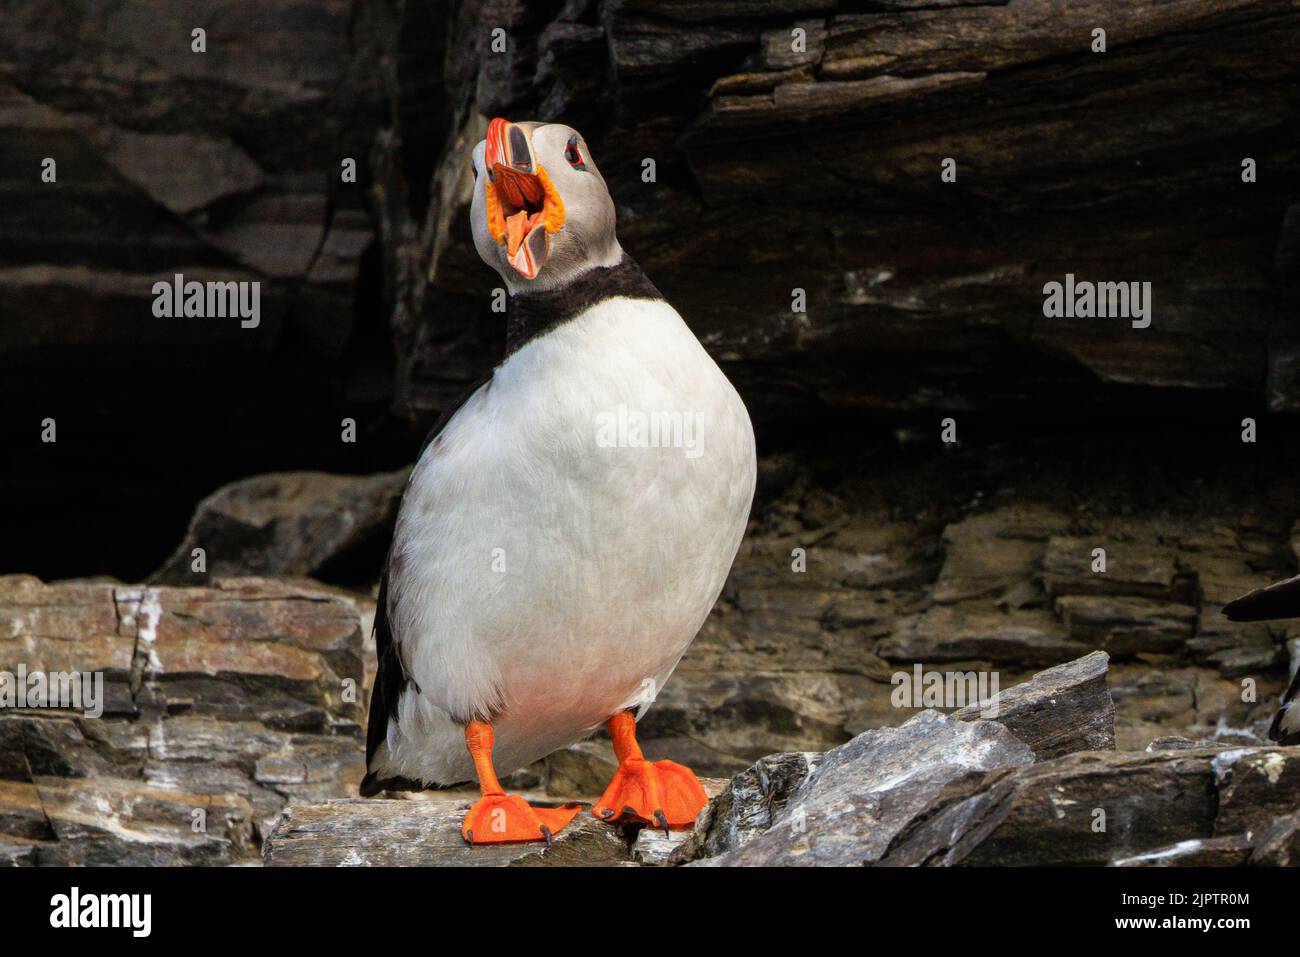 a puffin stands on a rocky ledge outside its rocky nesting hole calling loudly its beak wide open showing a long orange tongue Stock Photo